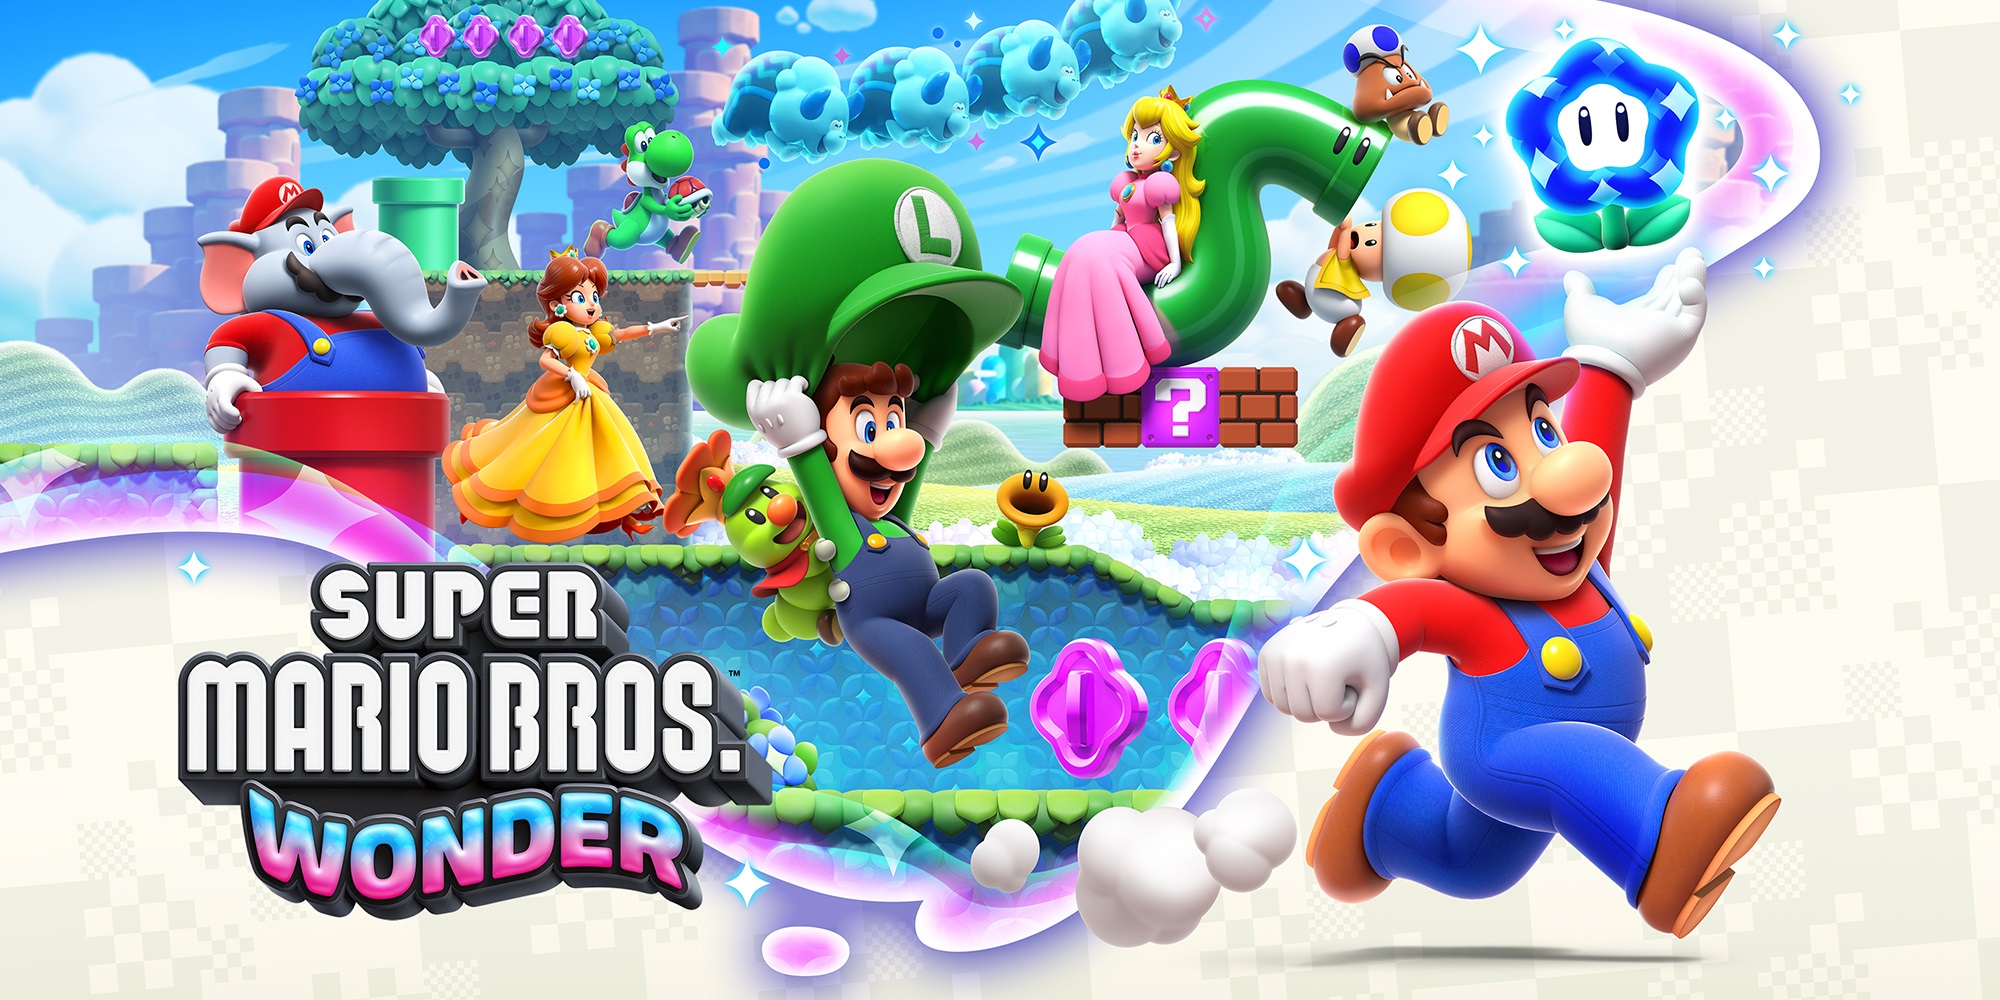 Super Mario Bros. Wonder Is The Fastest-Selling Super Mario Game Ever In Europe